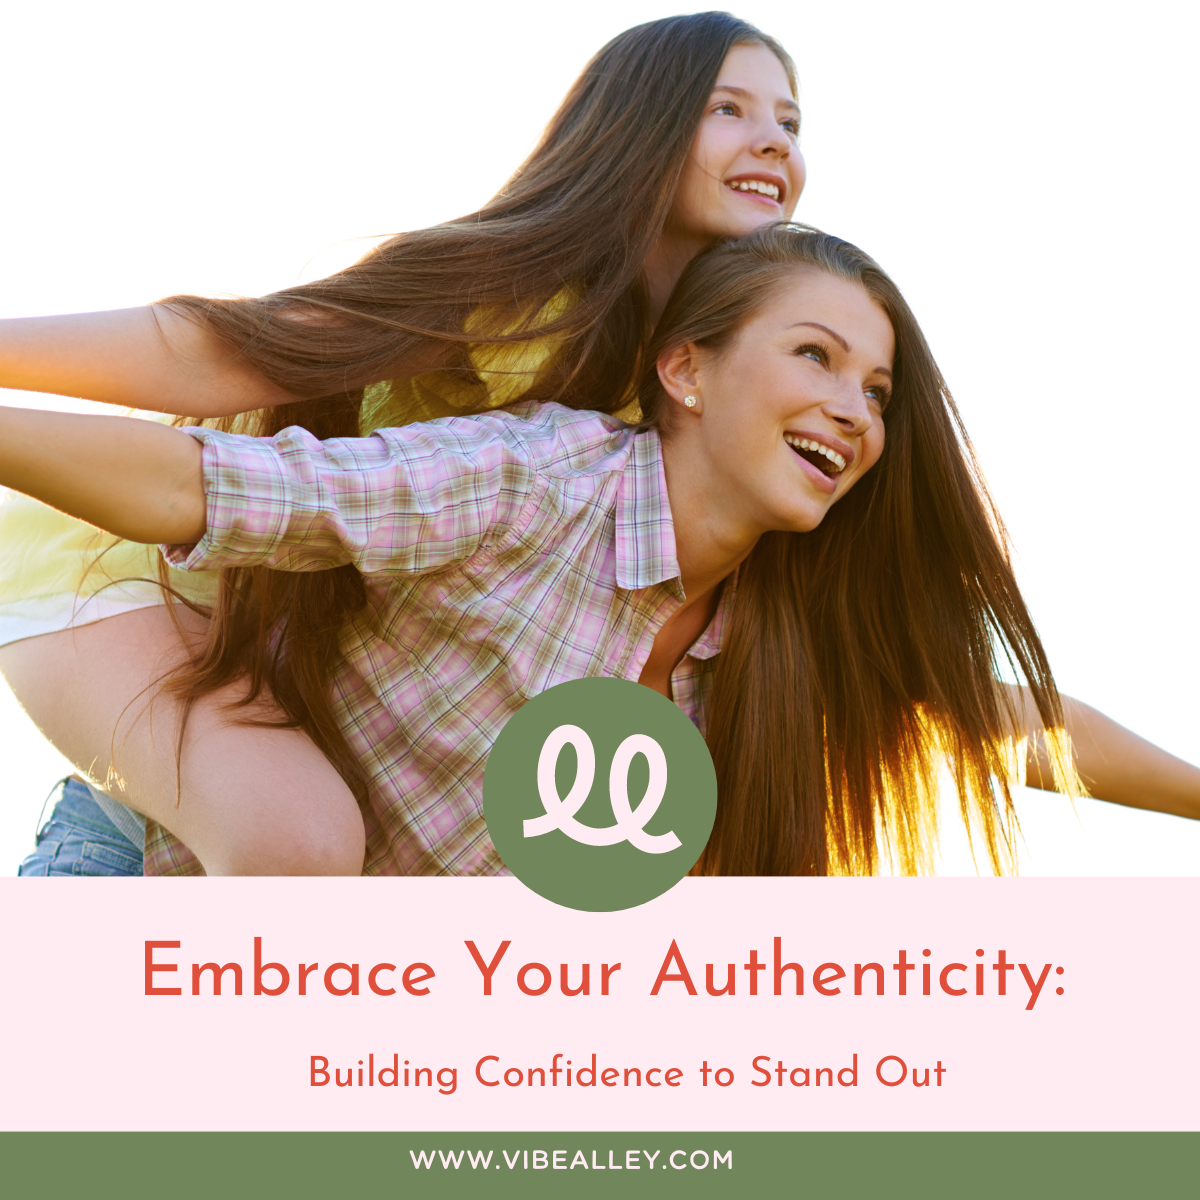 Embrace Your Authenticity: Building Confidence to Stand Out